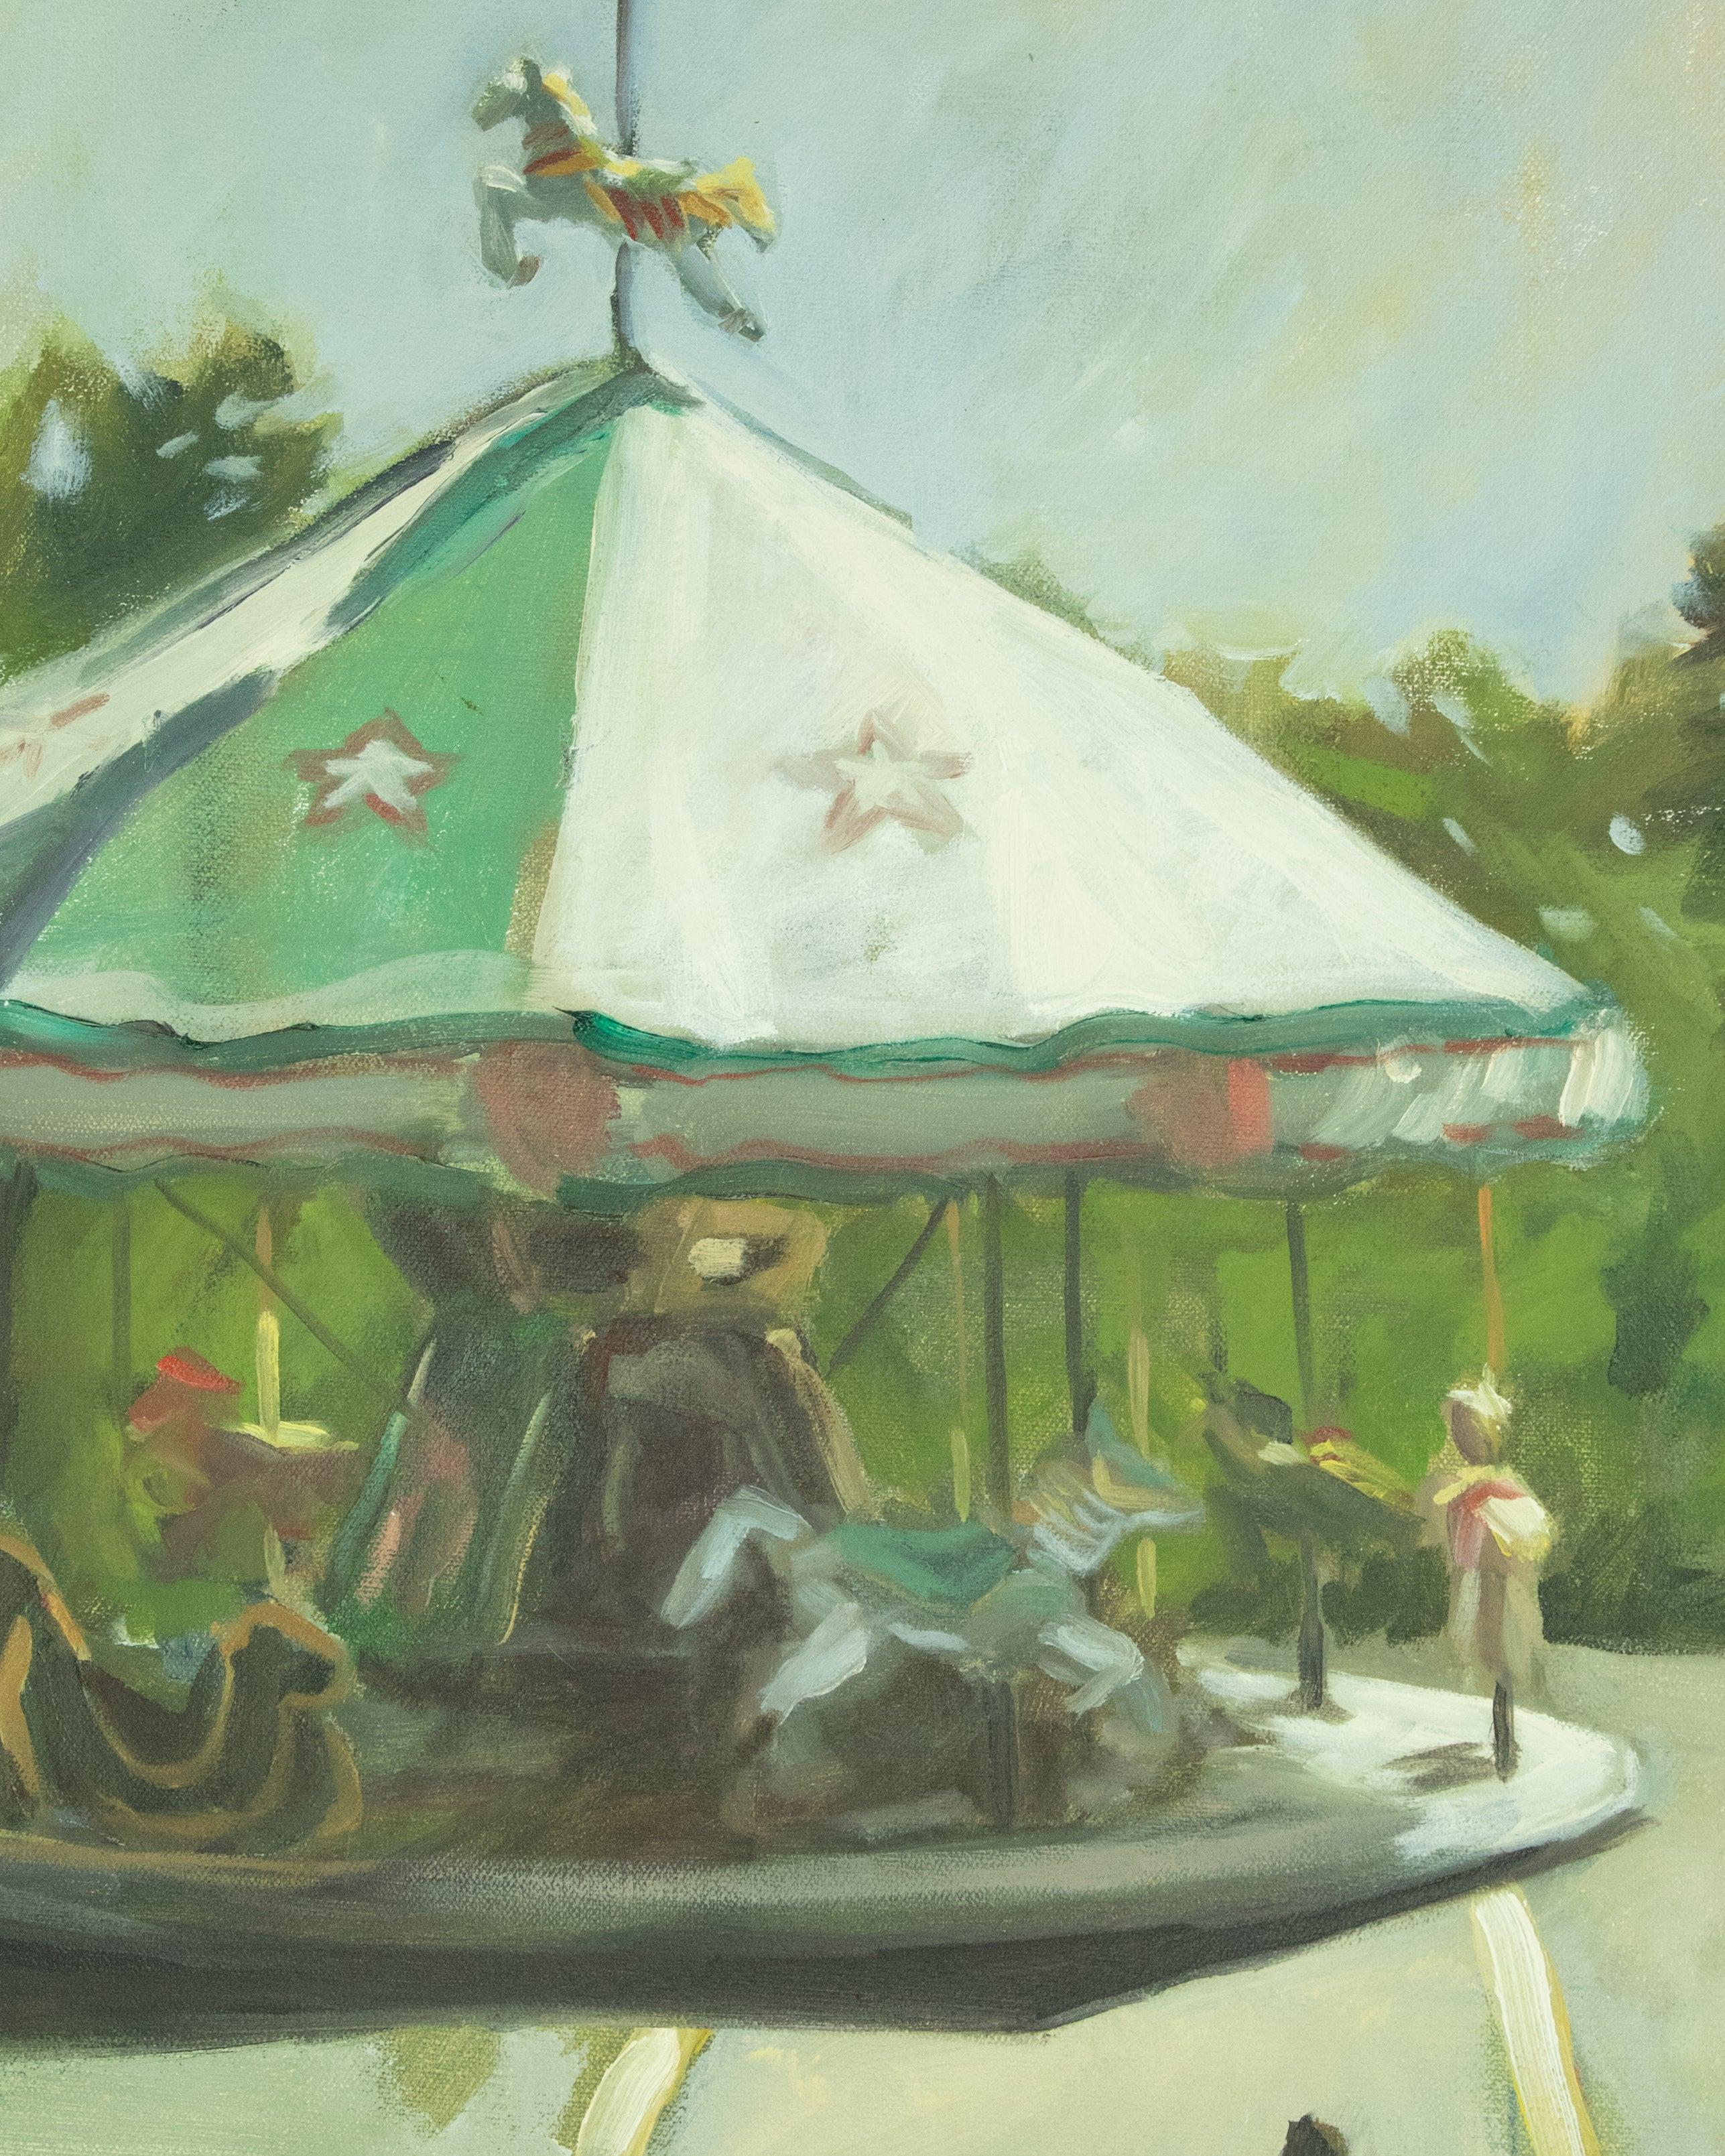 Painting by Georgia Nagle, who is a resident of Marietta, GA. The painting depicts a Merry Go Round at a Carnival. Done in light pastel colors and deep greens.